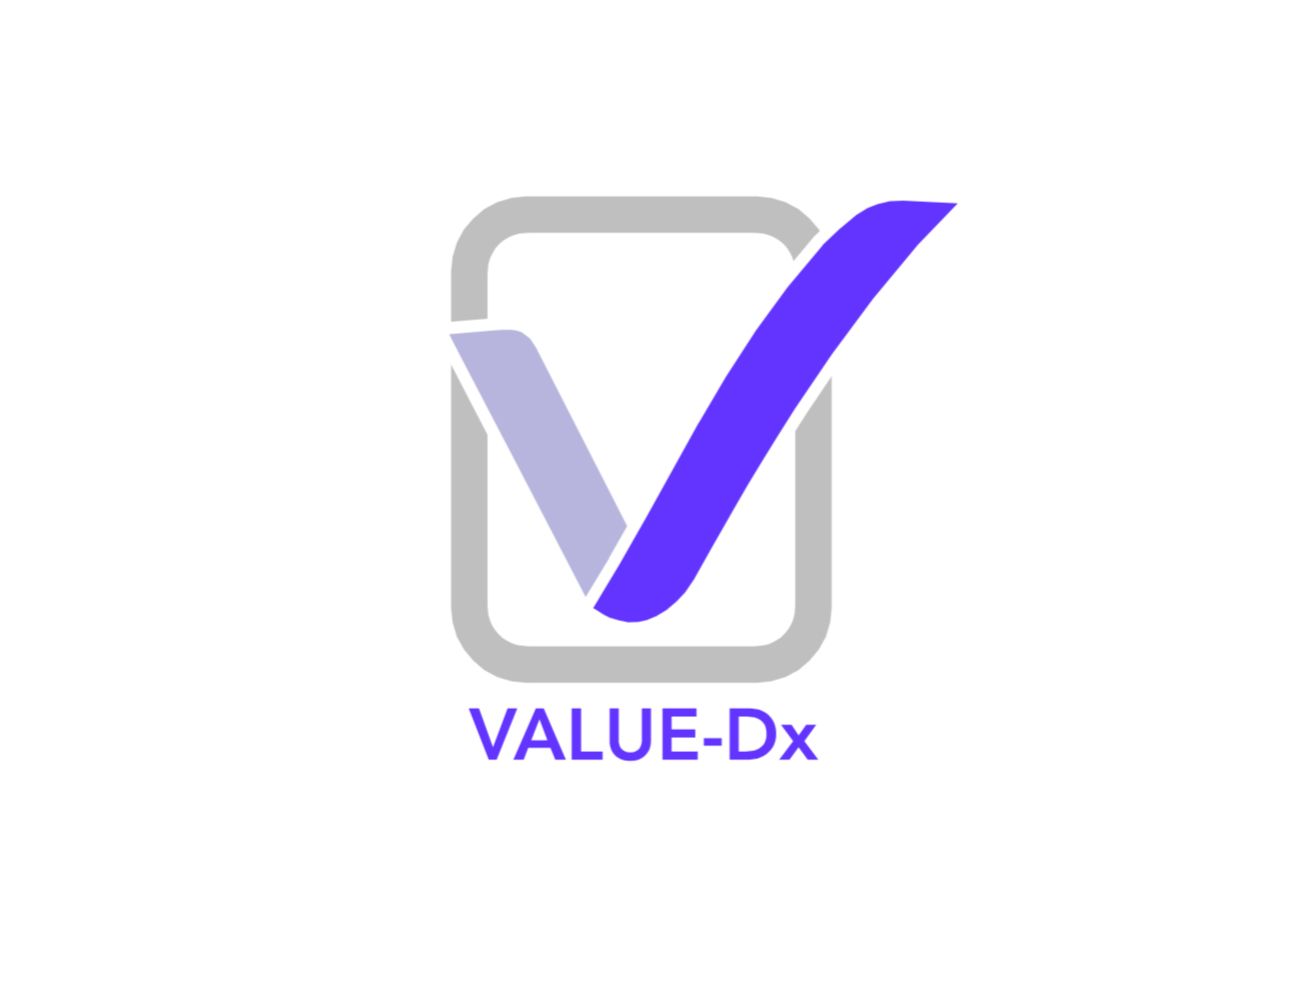 VALUE-Dx